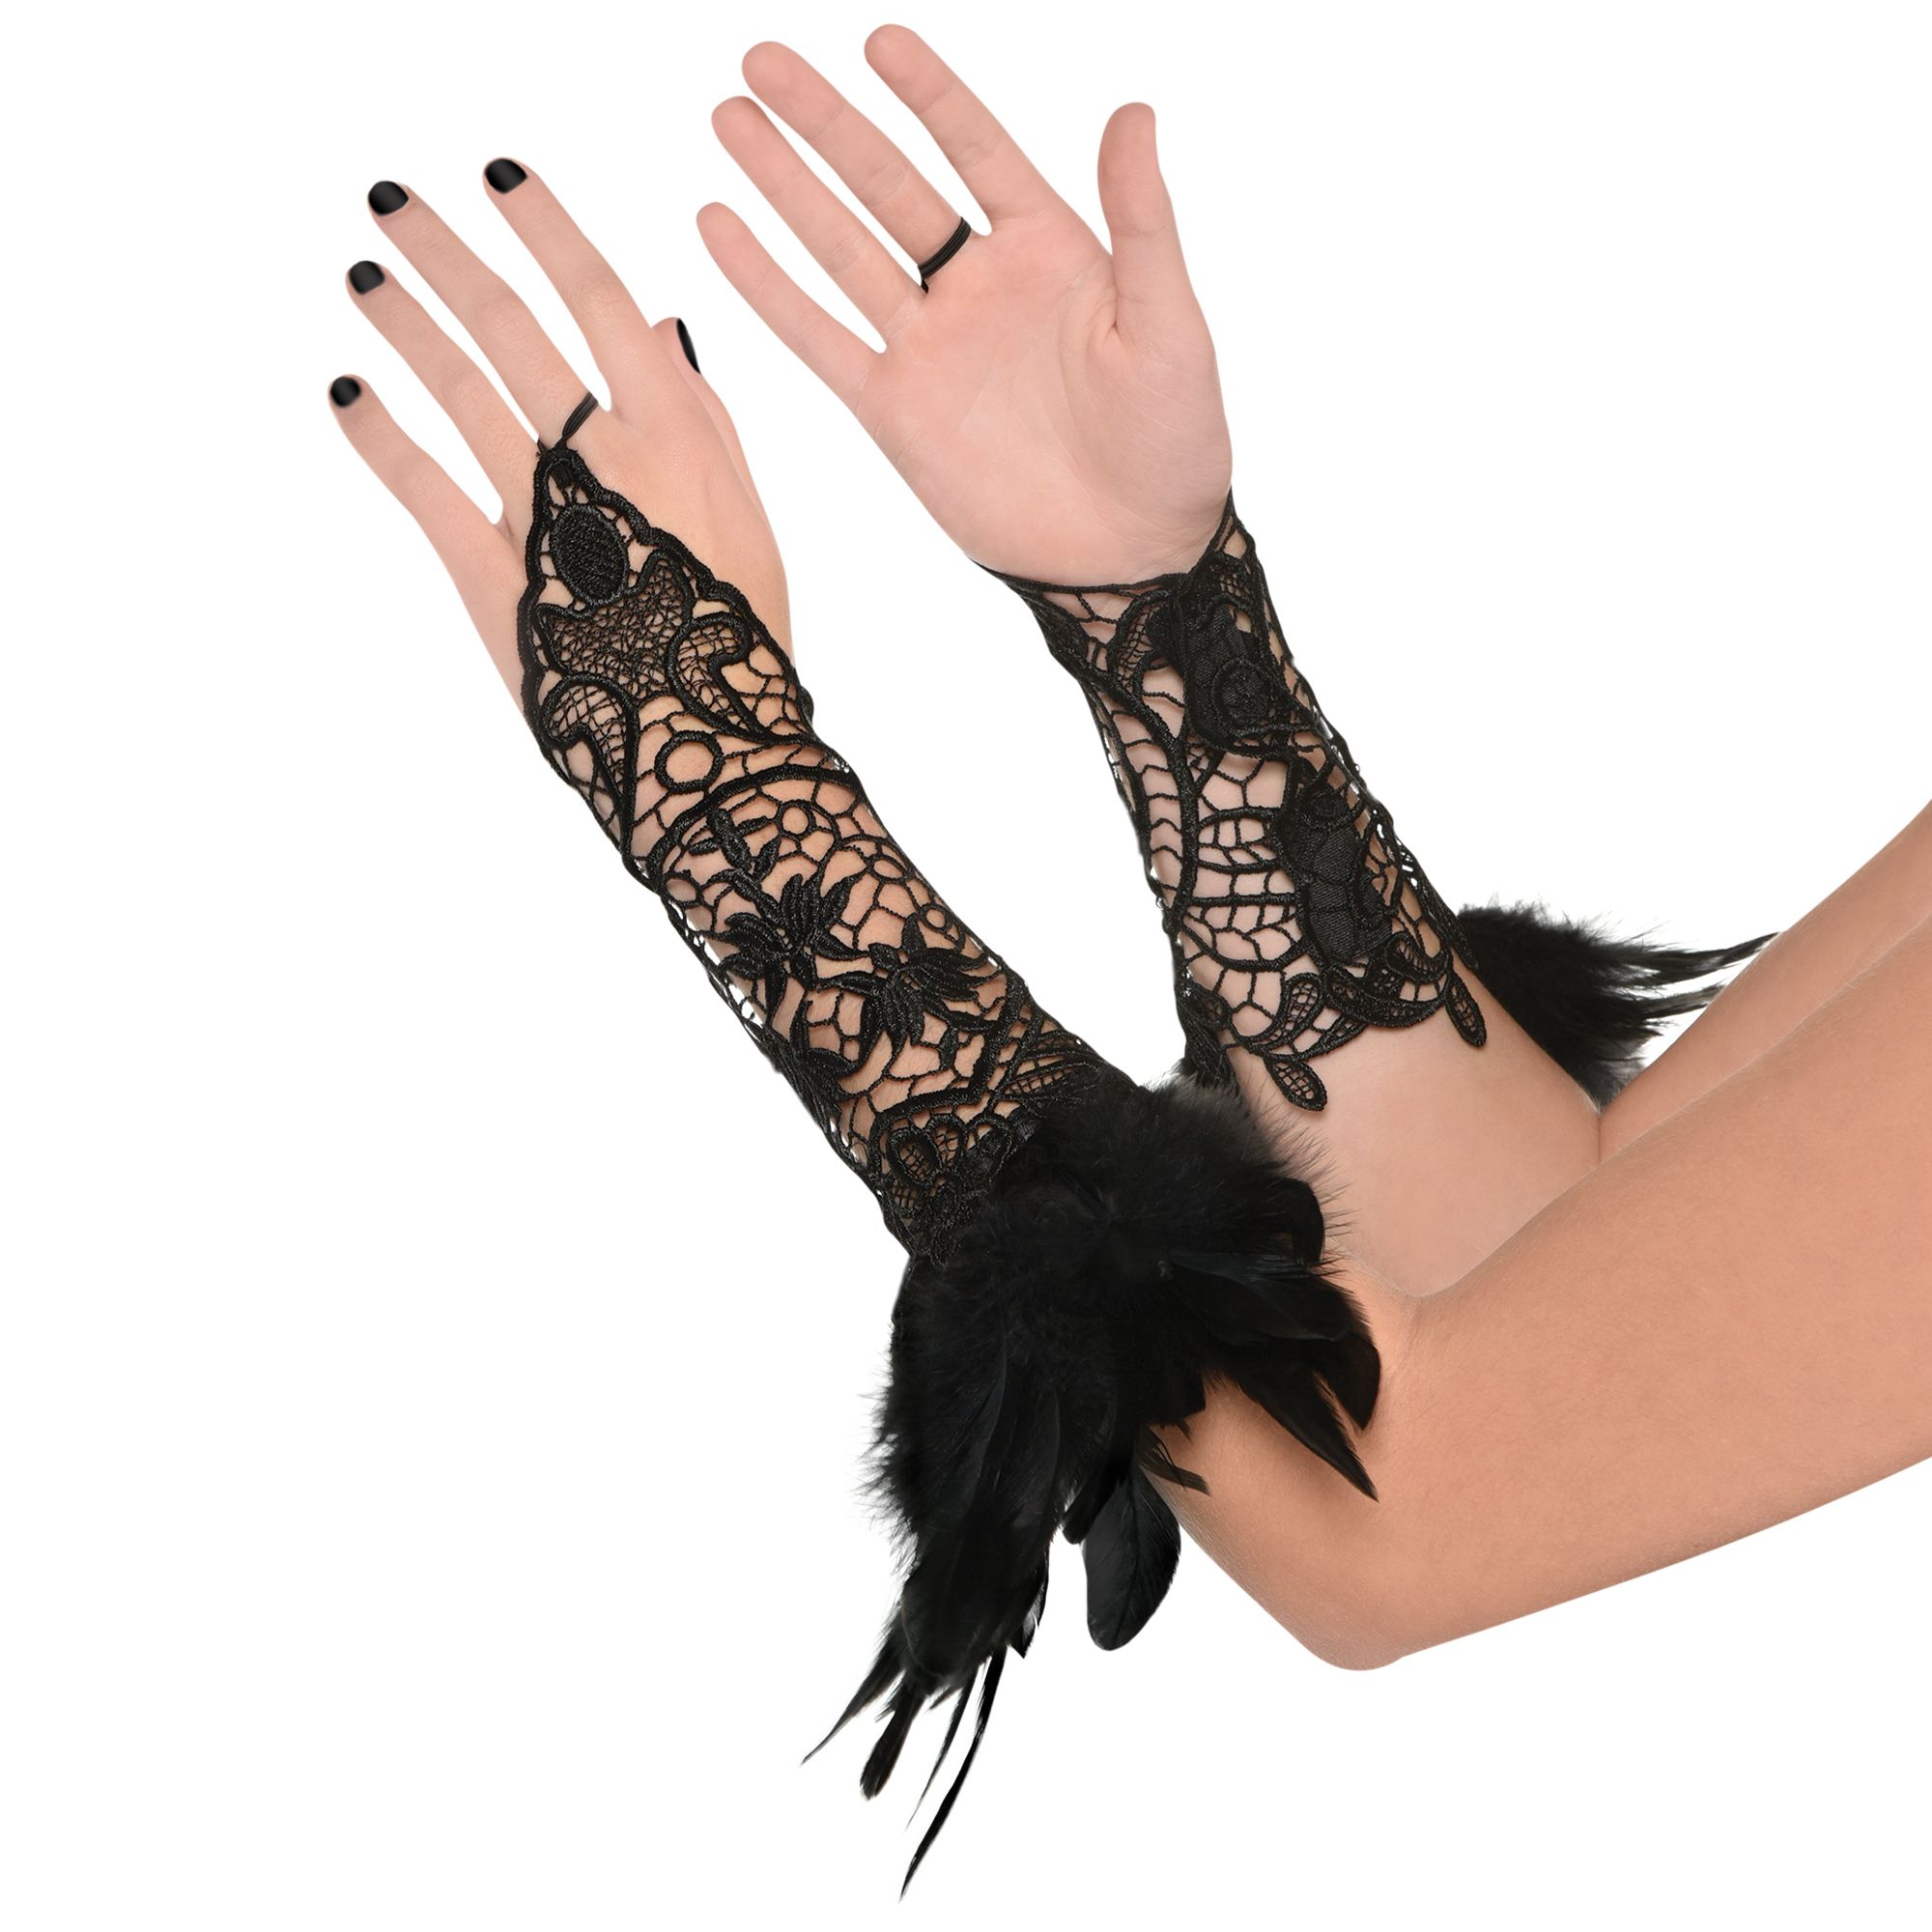 Feather Lace Arm Cuffs, Black, One Size, Wearable Costume Accessory for ...